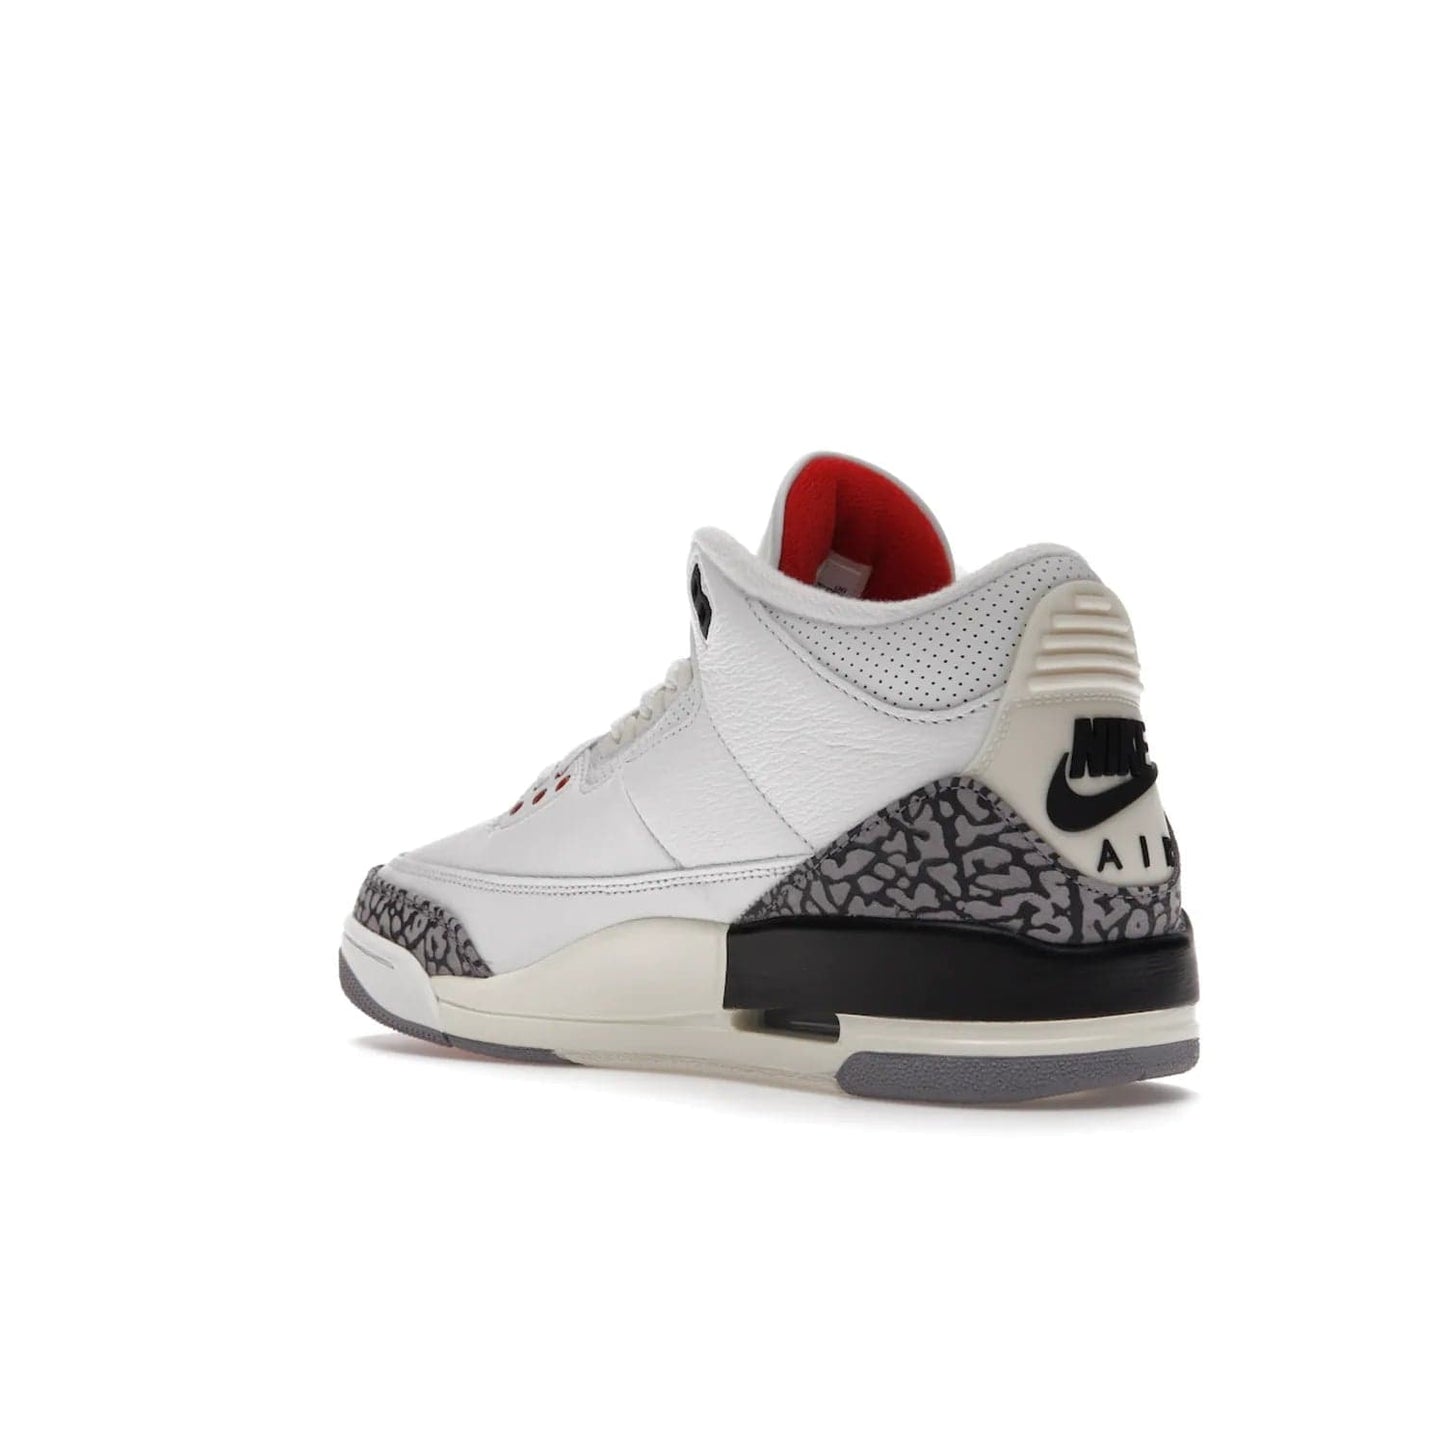 Jordan 3 Retro White Cement Reimagined - Image 24 - Only at www.BallersClubKickz.com - The Reimagined Air Jordan 3 Retro in a Summit White/Fire Red/Black/Cement Grey colorway is launching on March 11, 2023. Featuring a white leather upper, off-white midsoles and heel tabs, this vintage-look sneaker is a must-have.